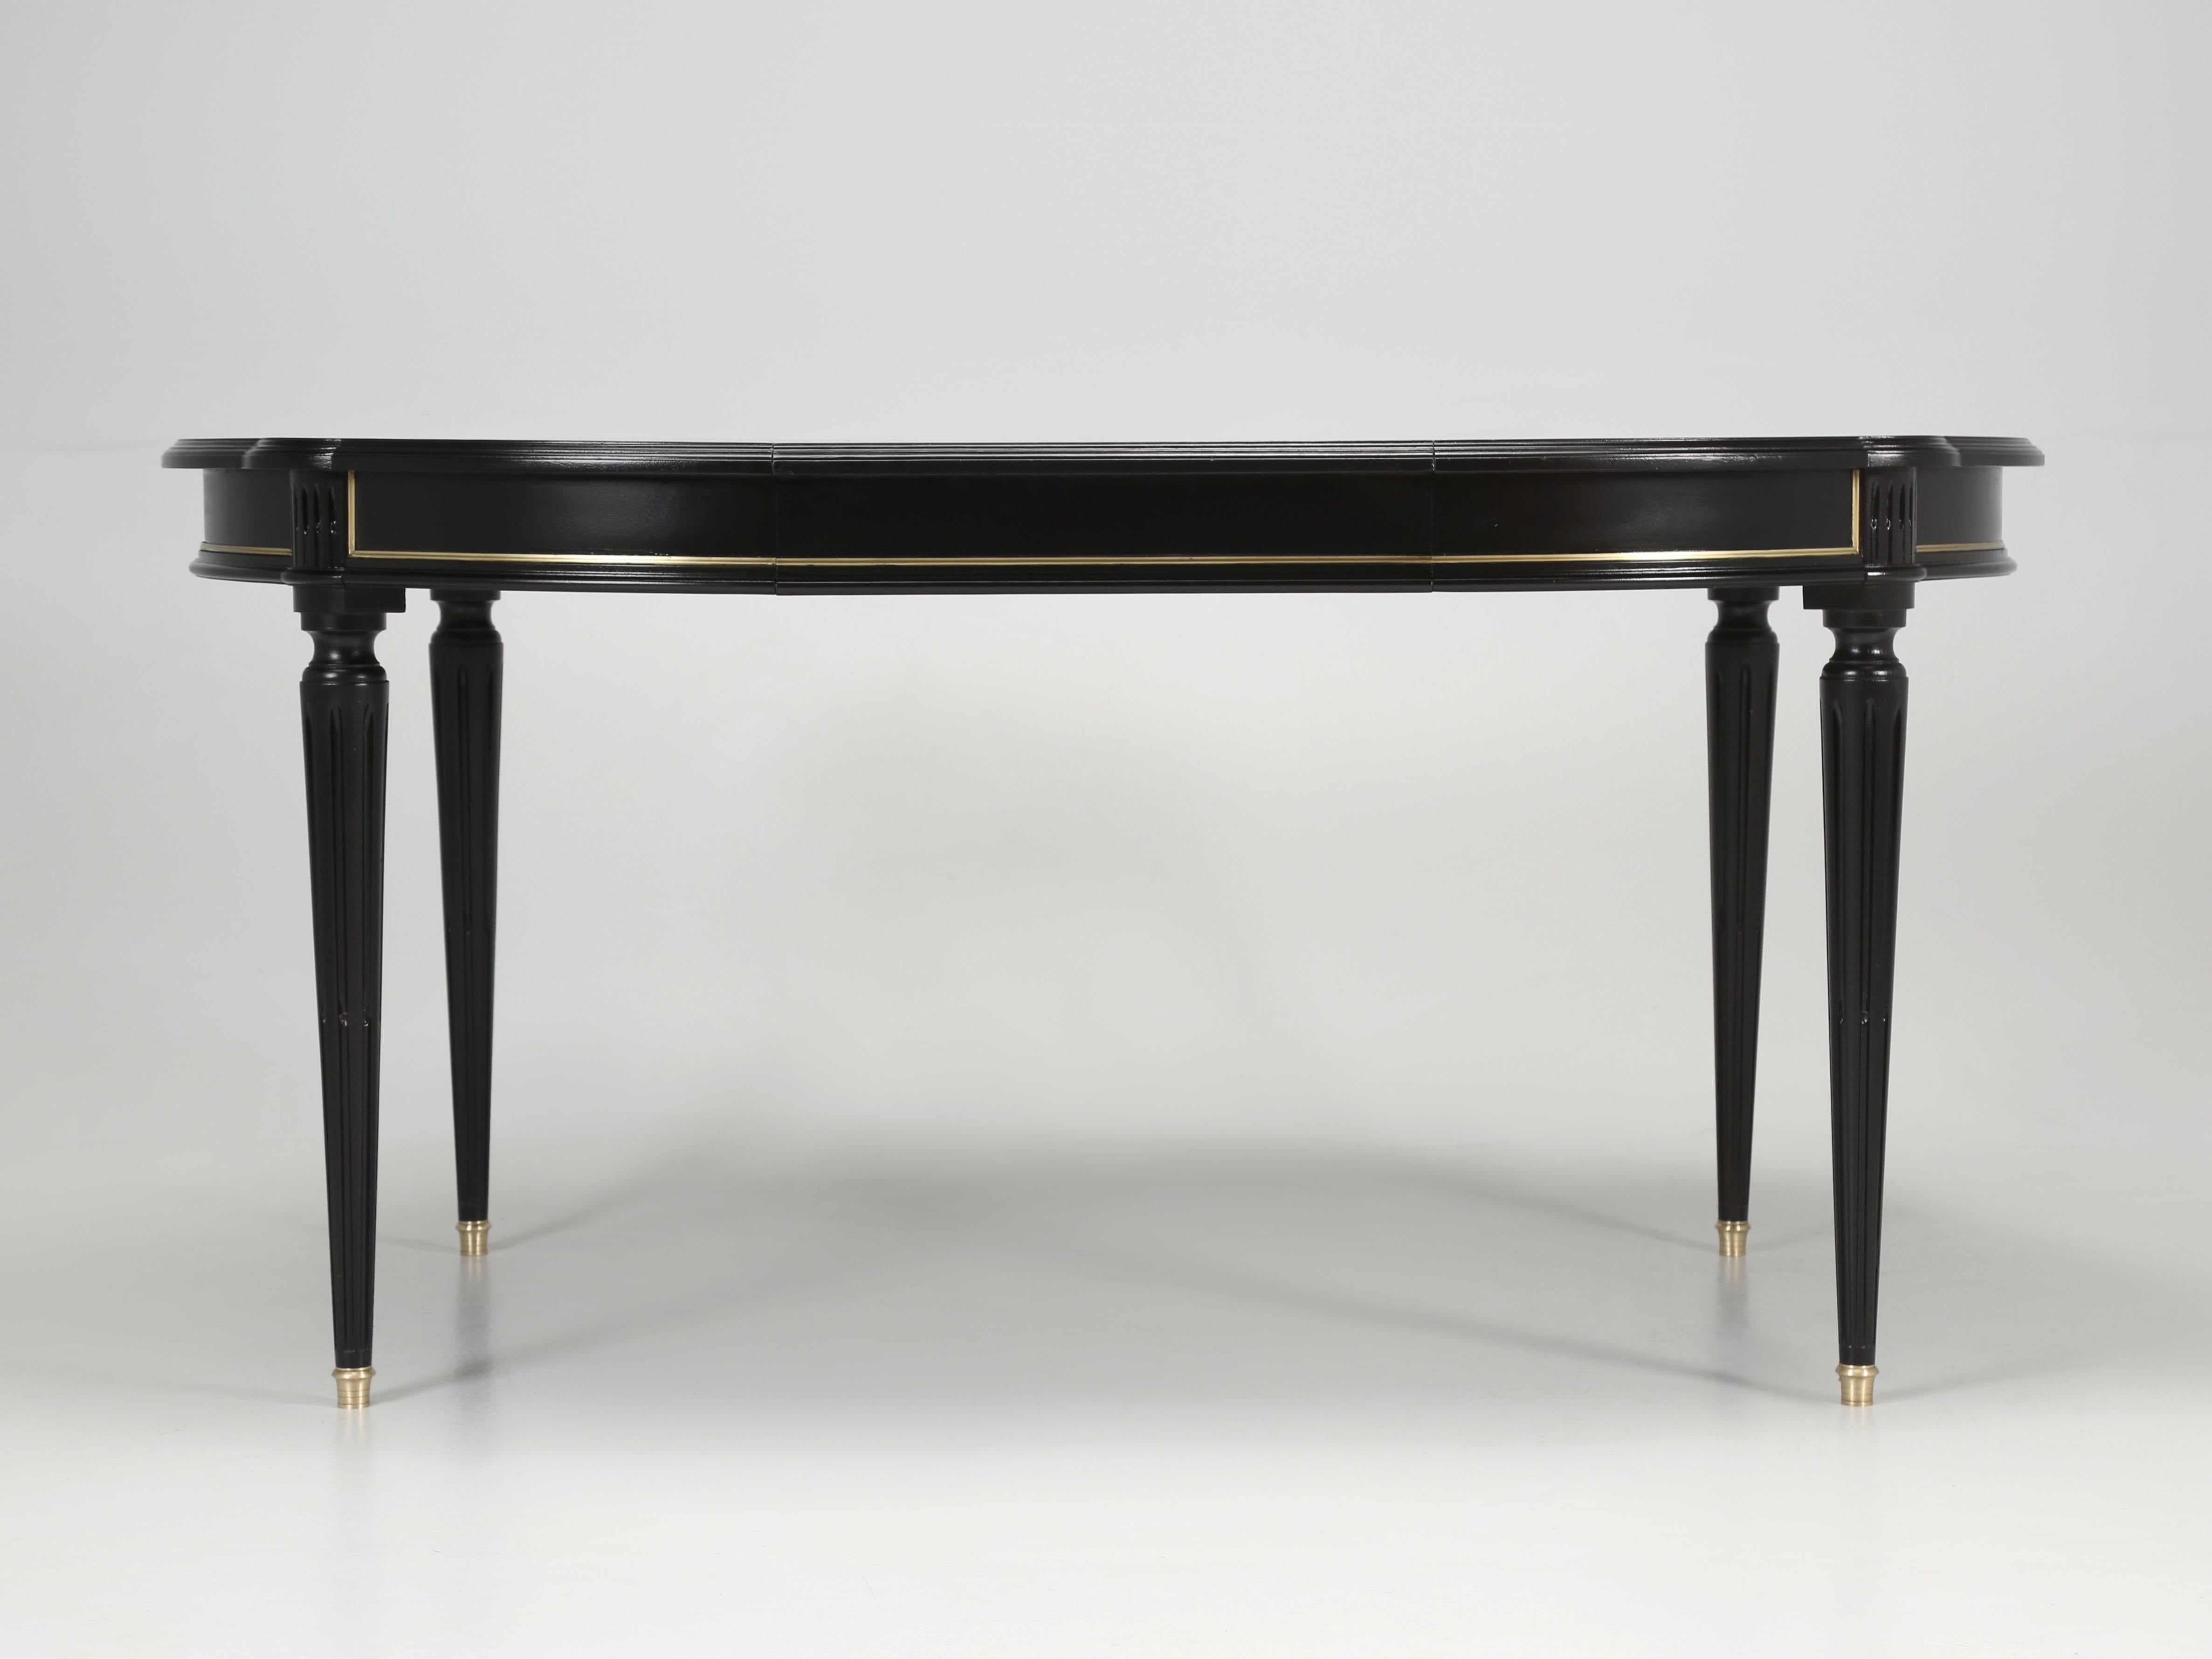 French Louis XVI style dining table, with one-removable matching leaf. The Louis XVI style dining table is constructed from mahogany and our Old Plank finishing department just treated the Louis XVI table to an old school ebonized finish, which